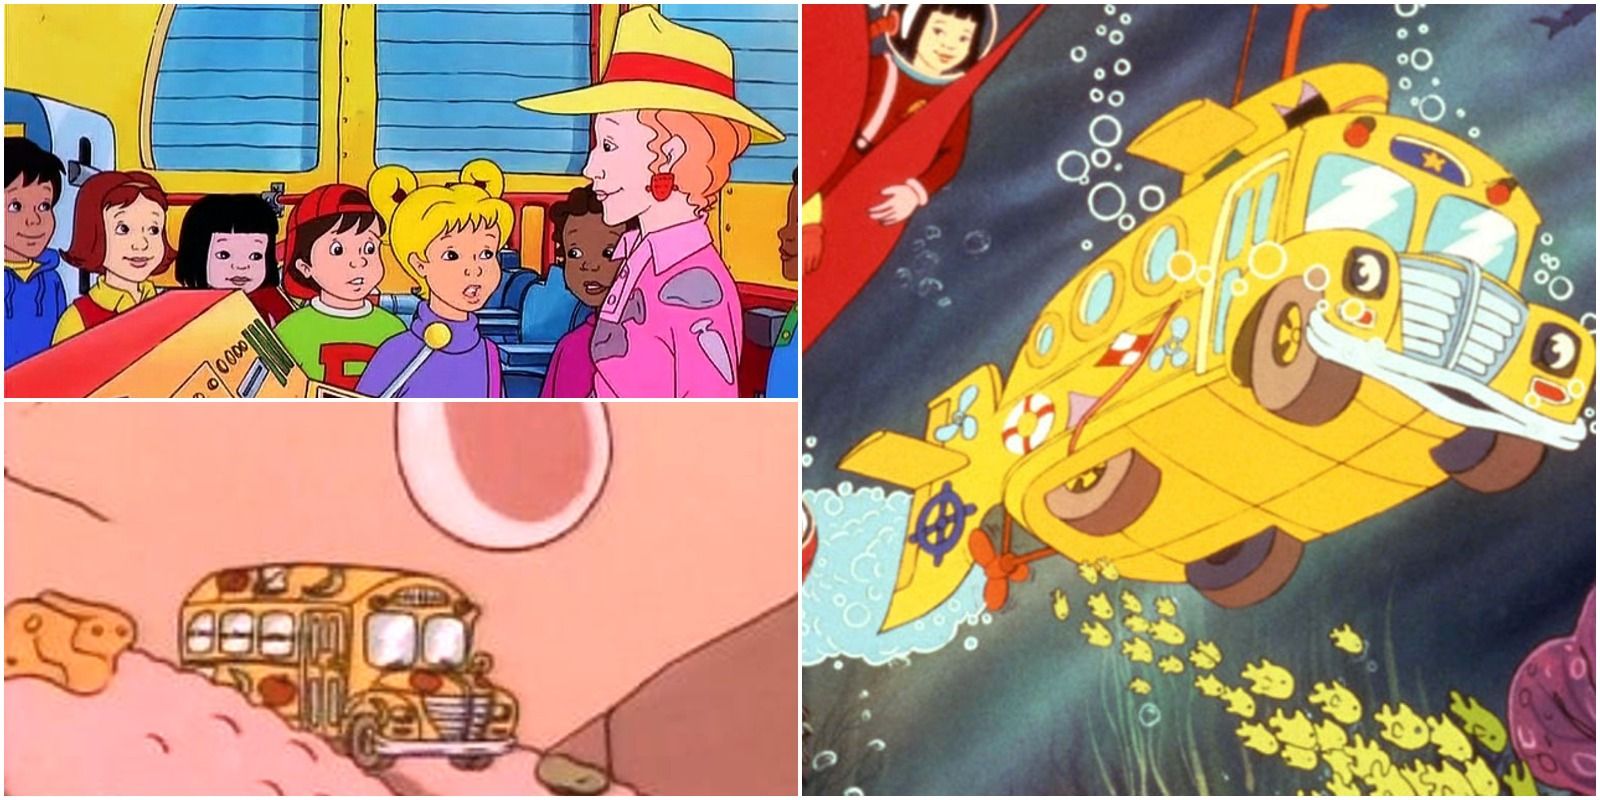 The Magic School Bus under the ocean and being swallowed by Ralphie from the show